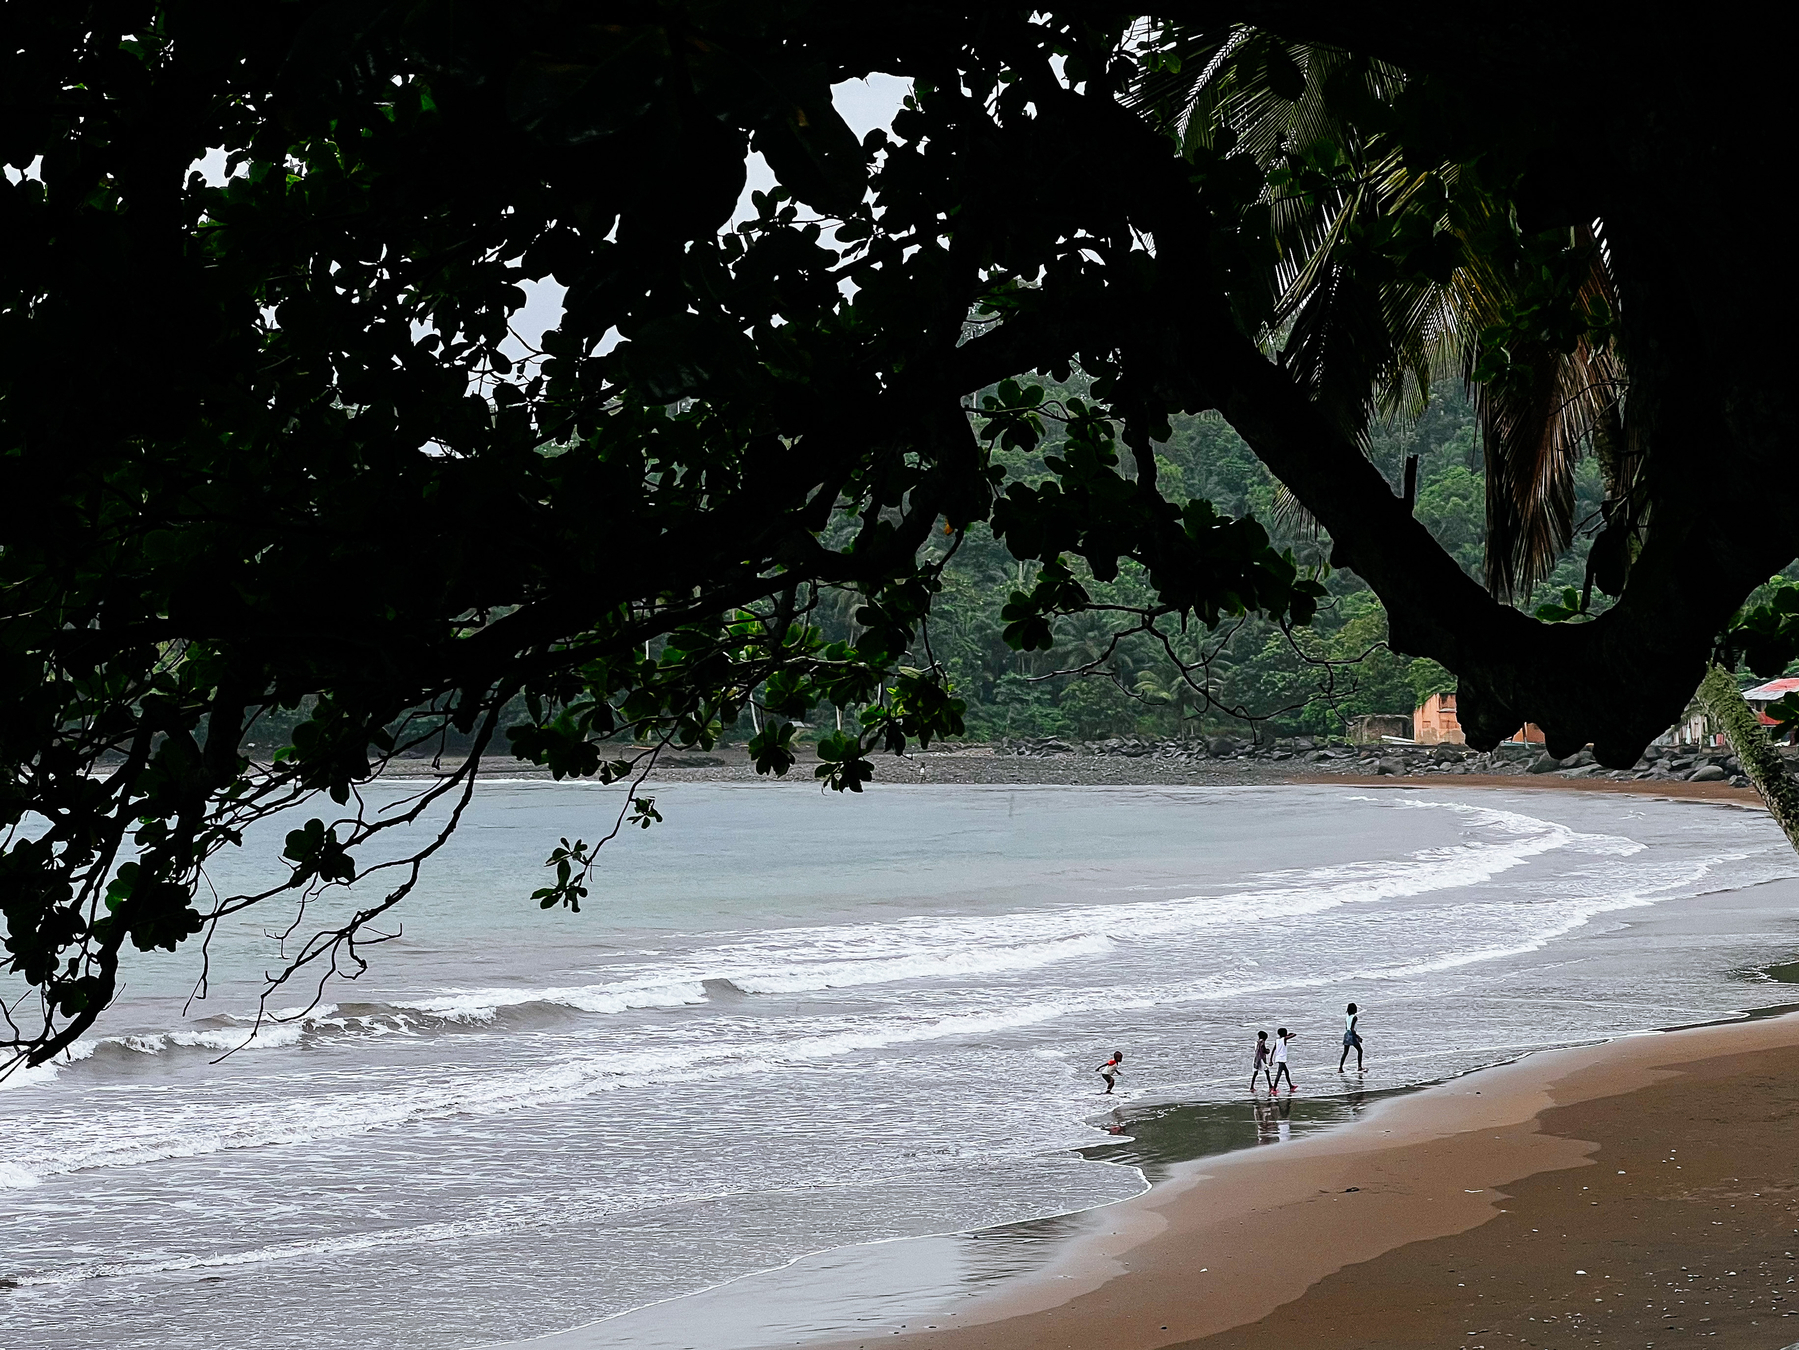 Children play on the beach, in a rainy day. 